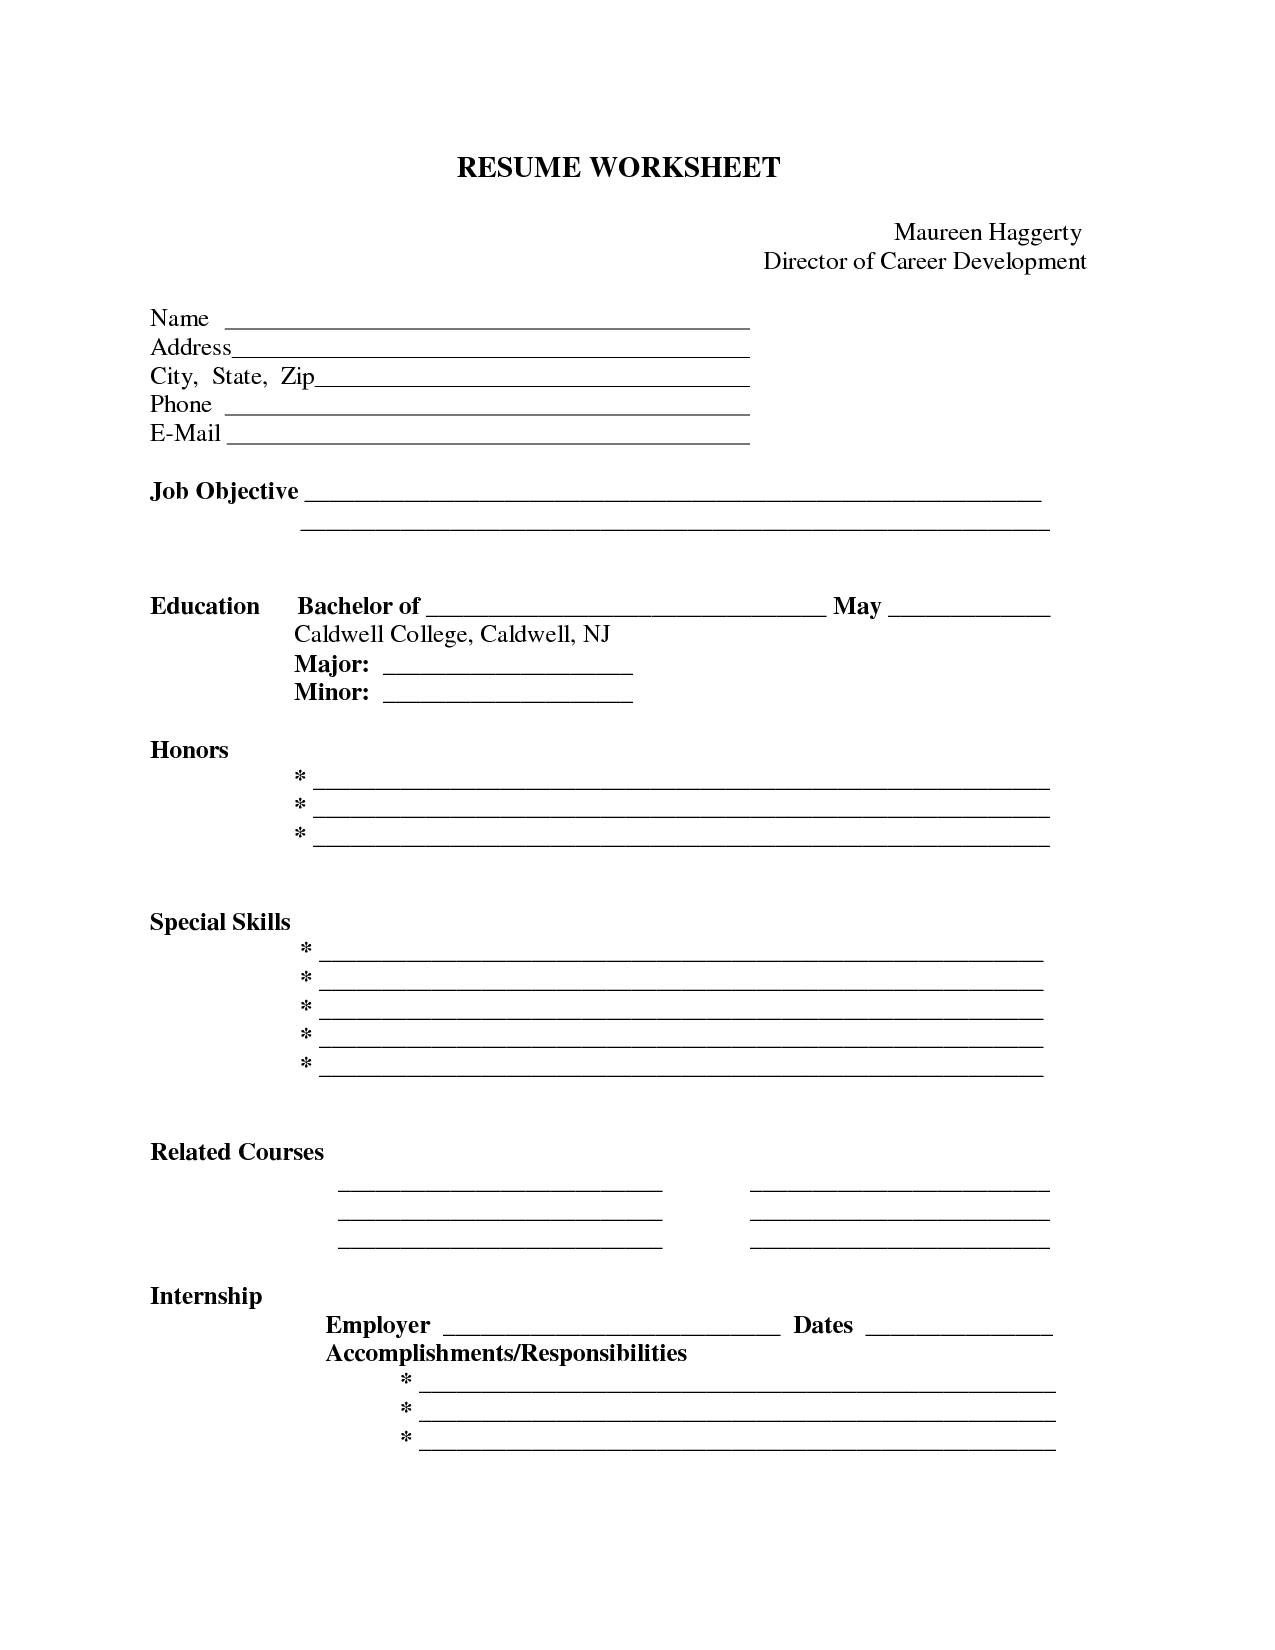 Blank Resume Form To Print Fill In The Cv Template 4 Tjfs Journal